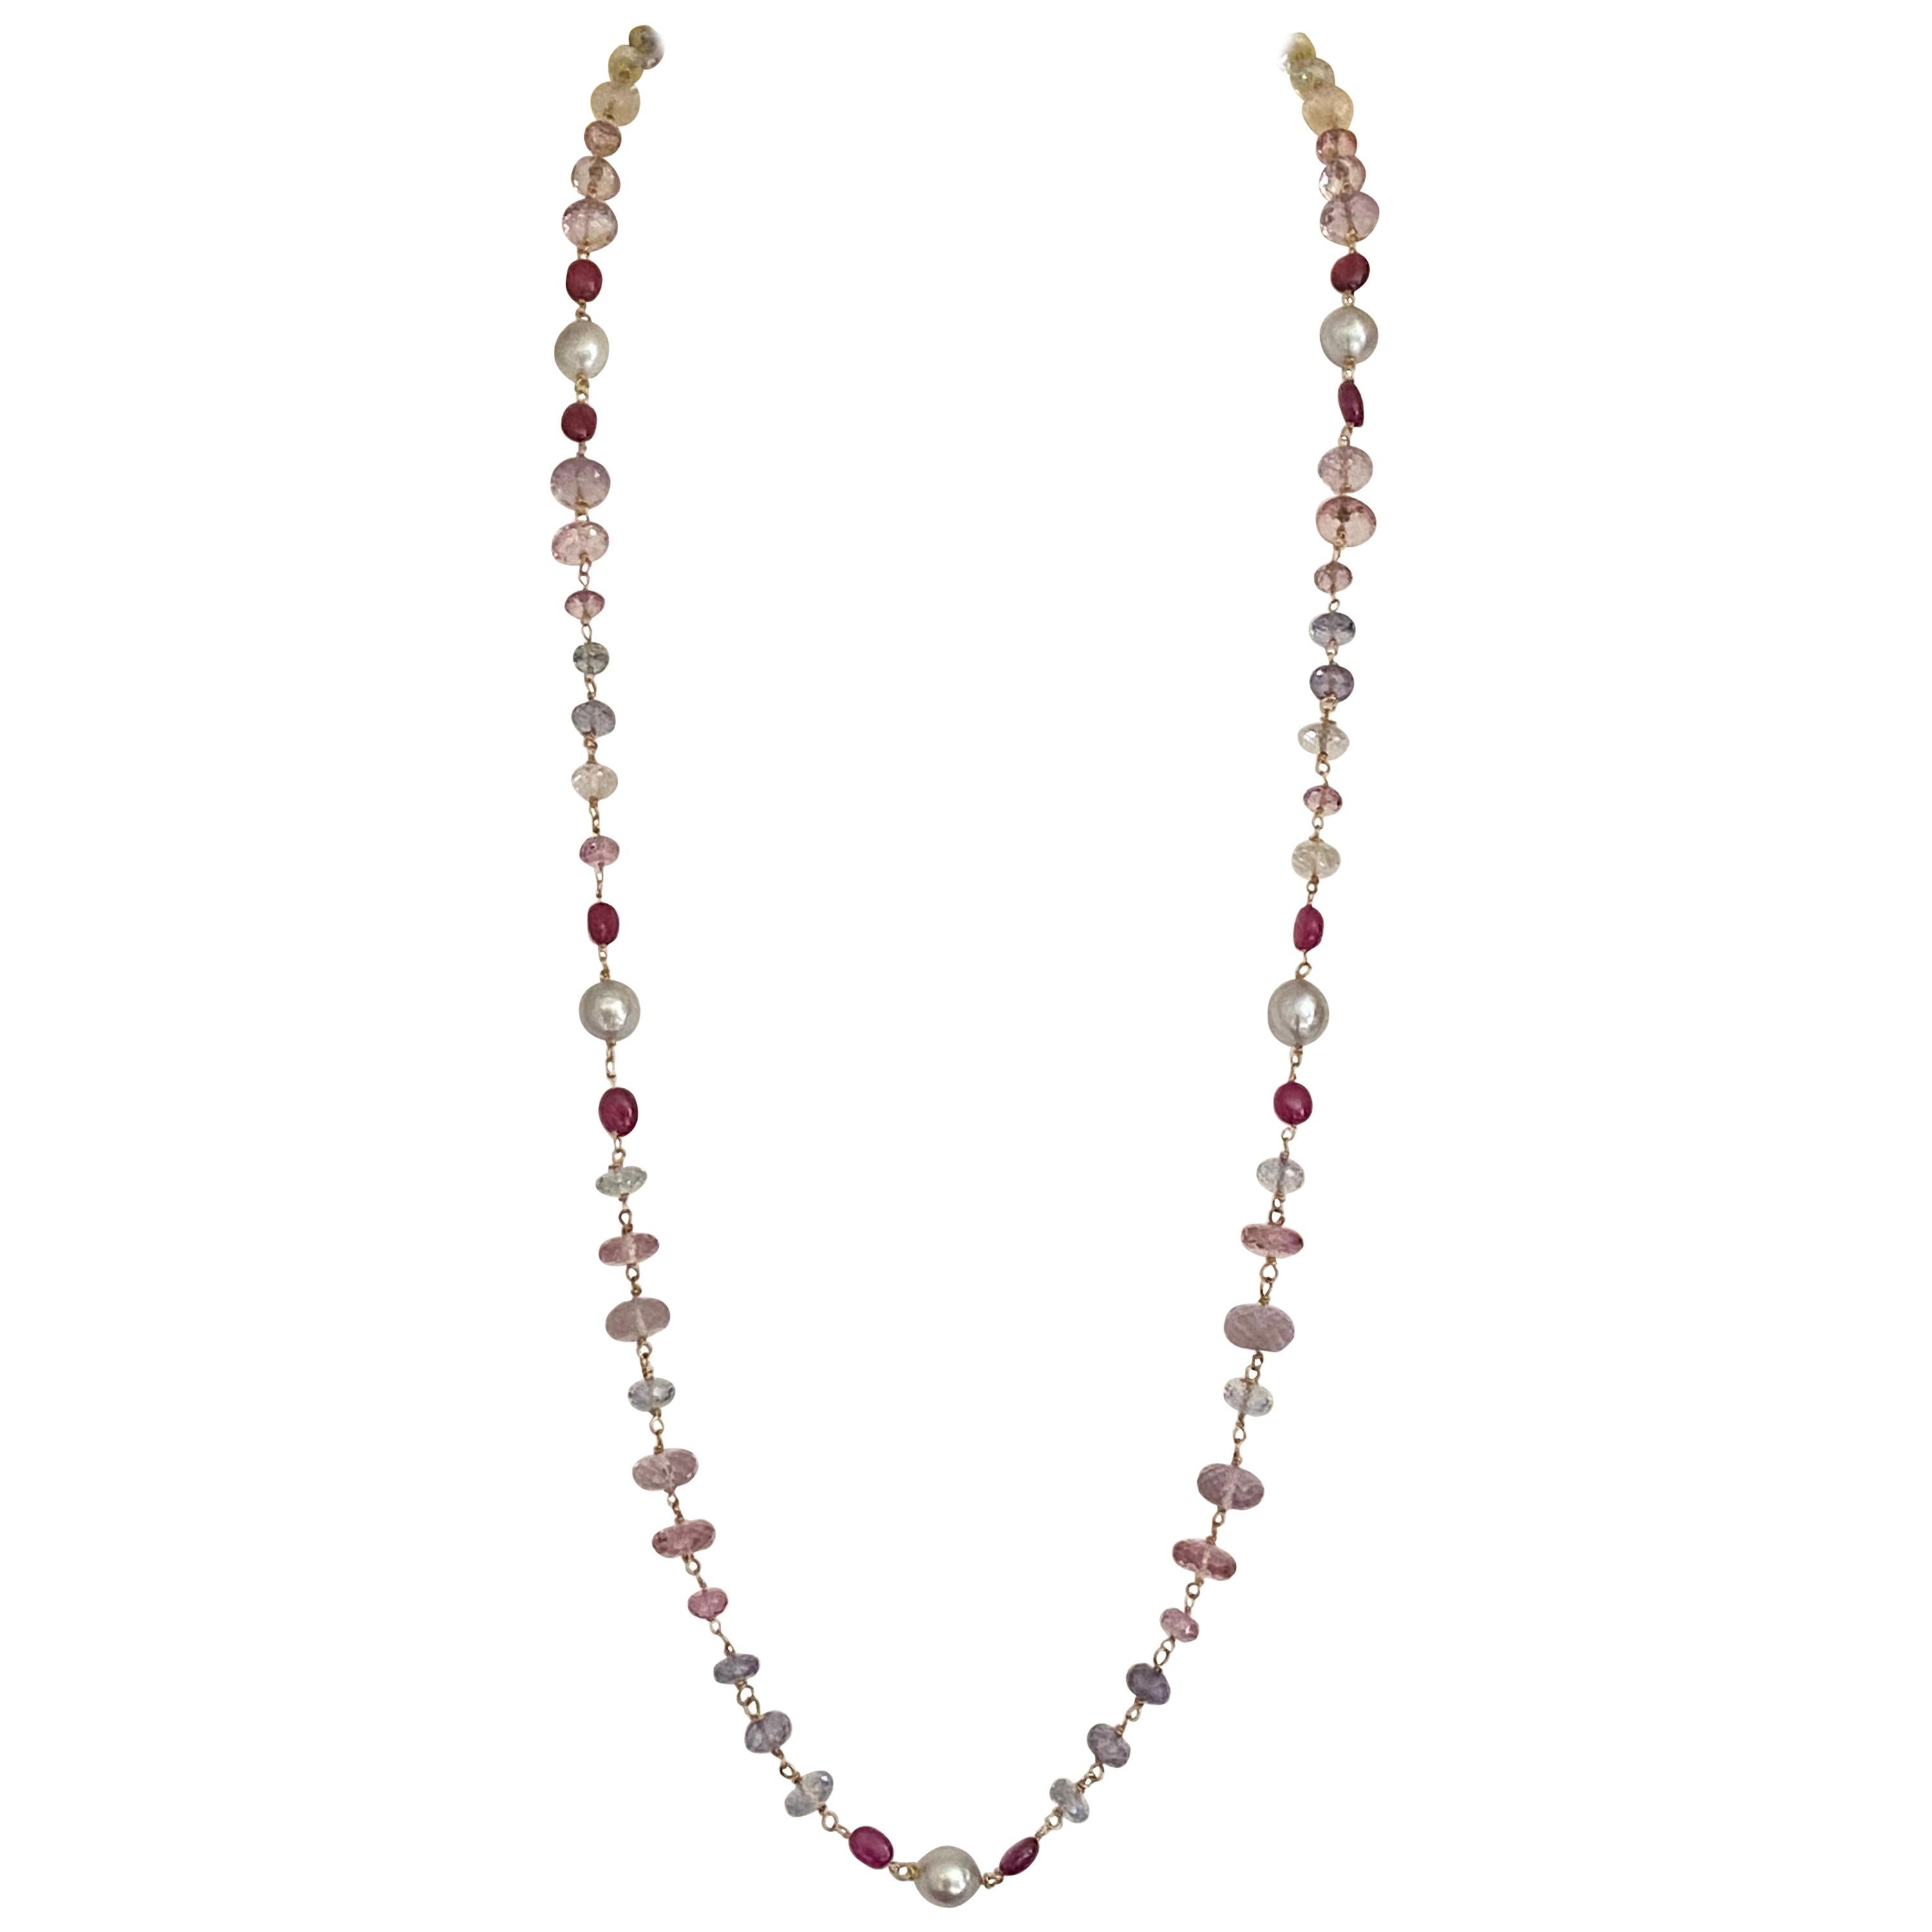 Ruby, South Sea Pearls, Pink and Blue Topaz Pink Amethyst Beads in 18 Karat Gold For Sale